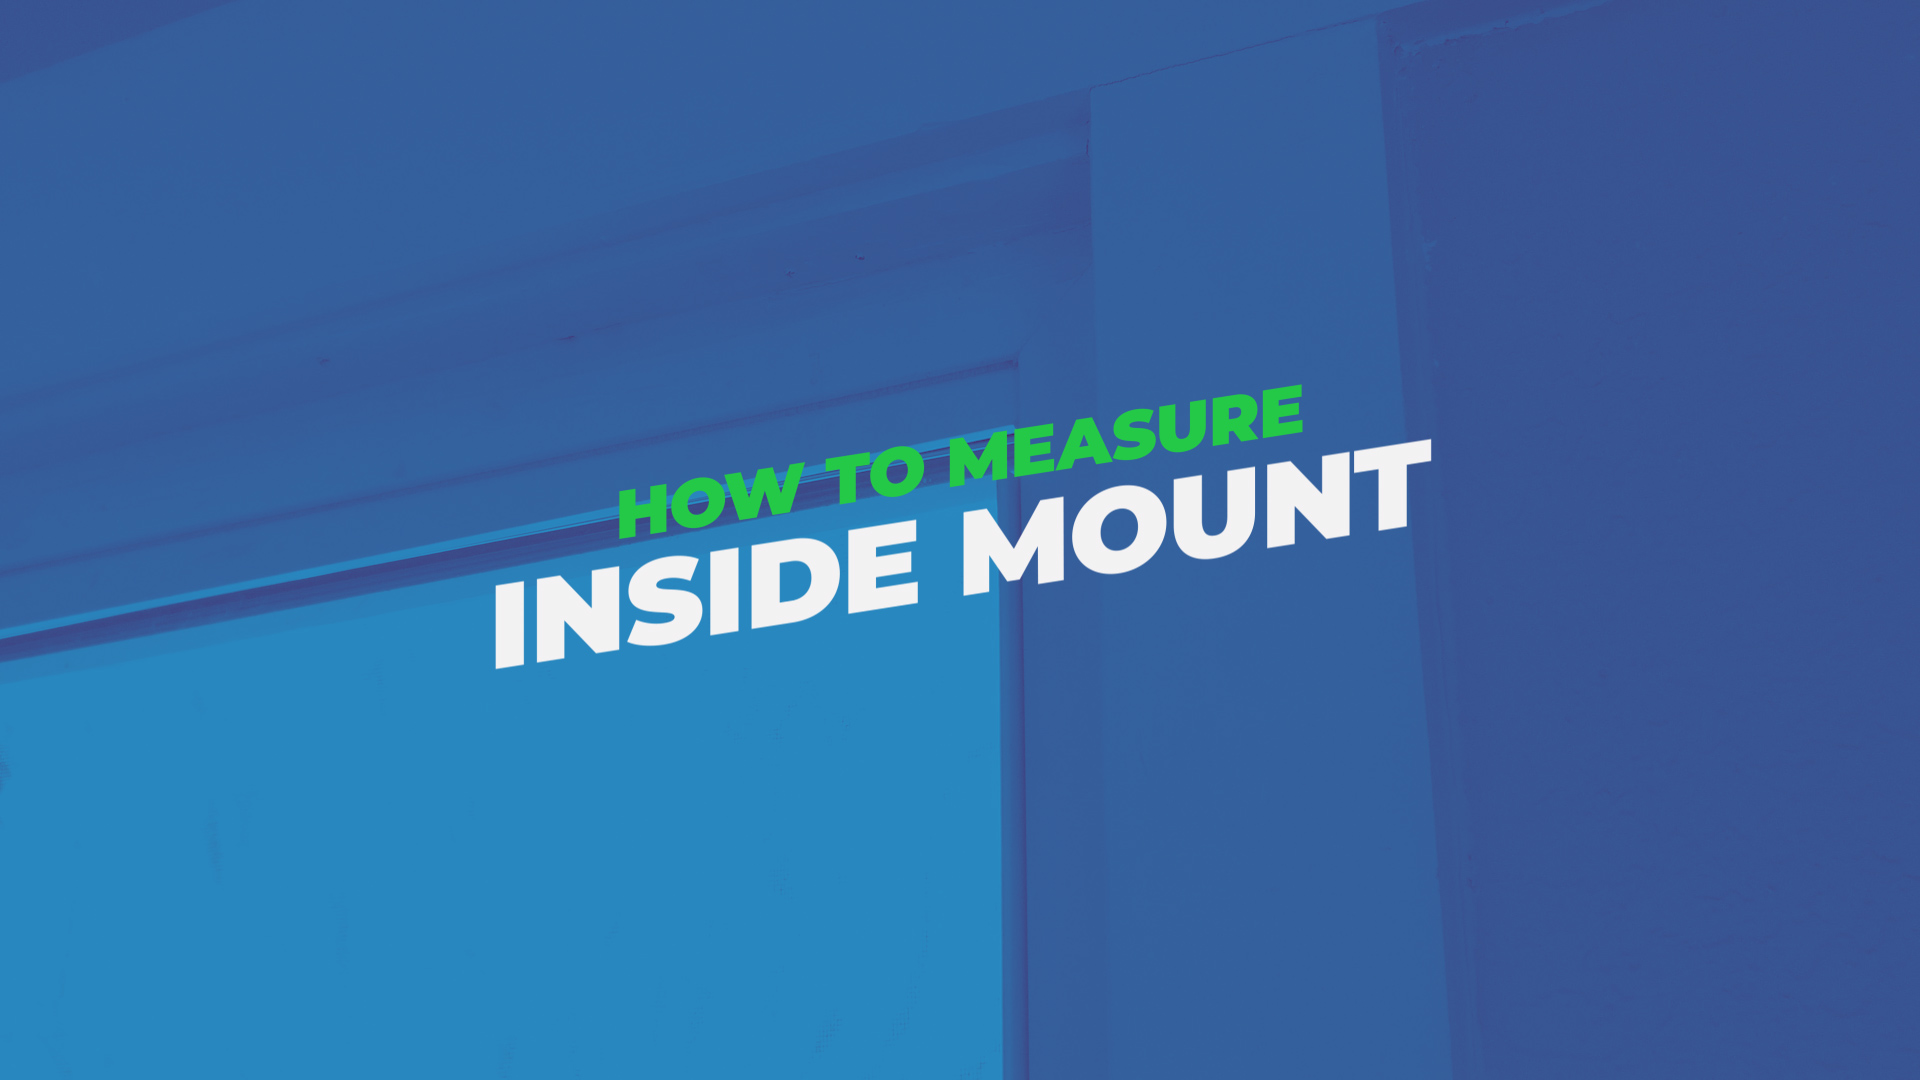 Tom's Tips: How to Measure Inside Mount